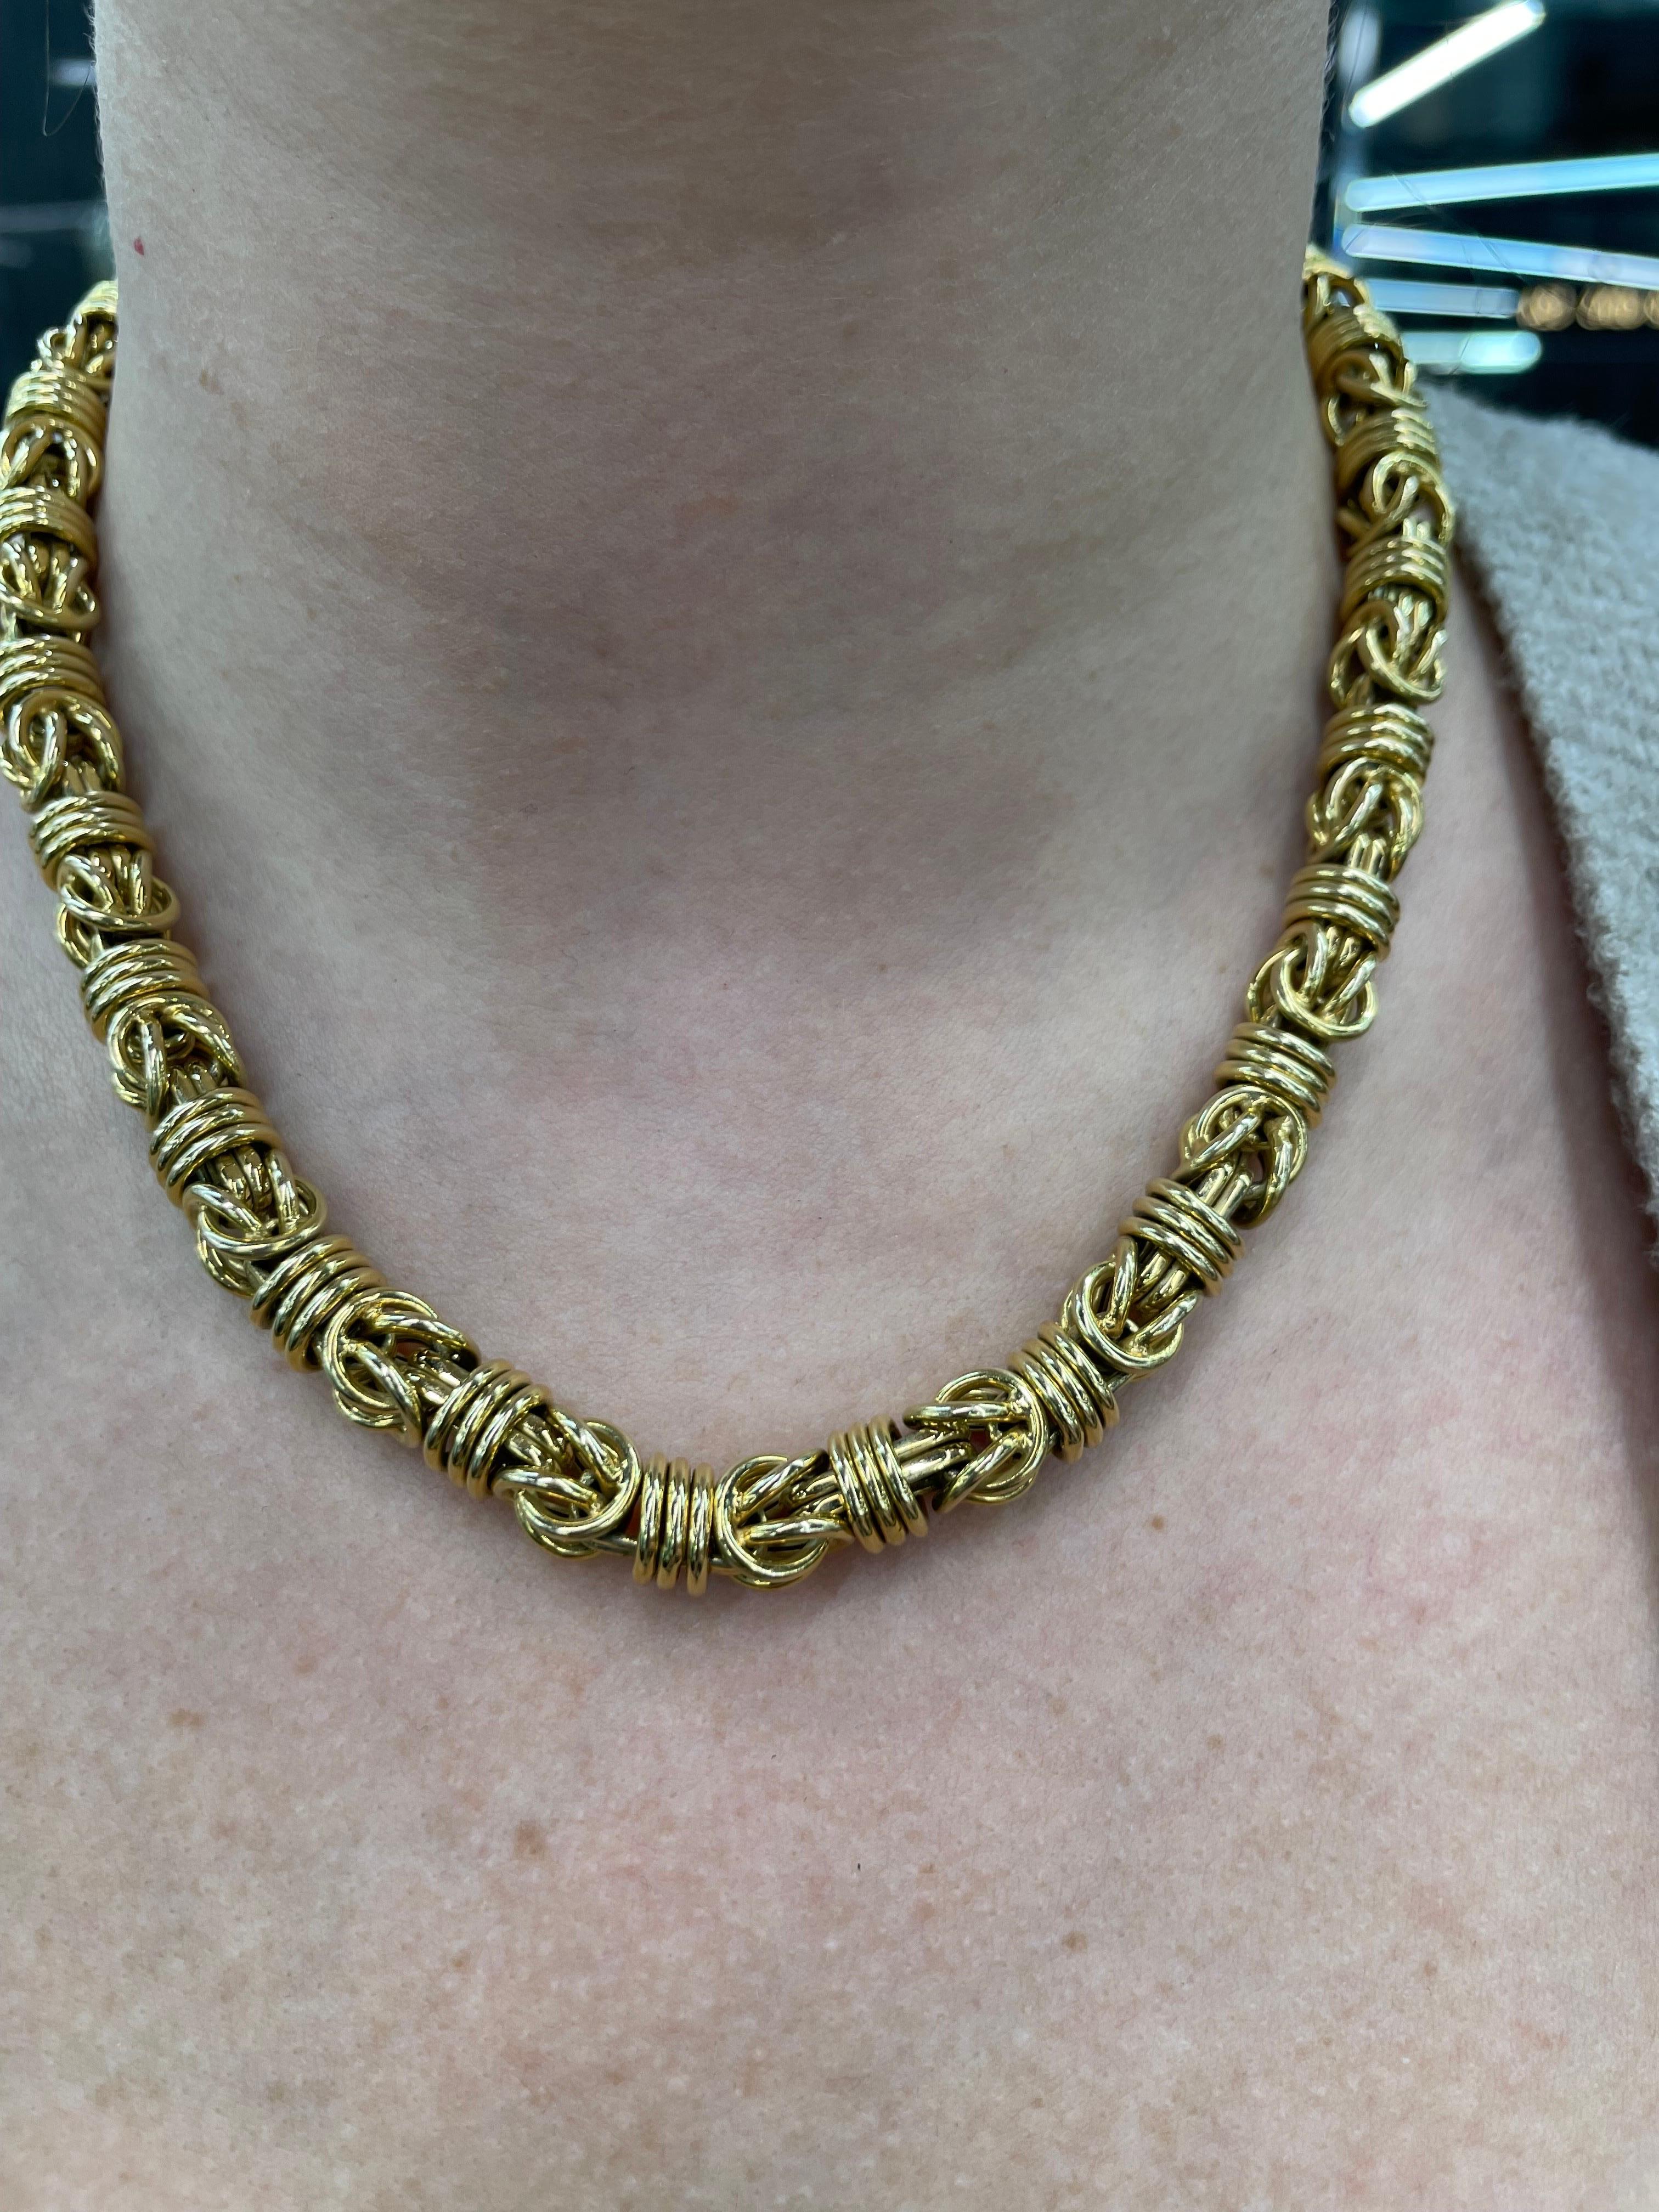 14 Karat Yellow Gold Byzantine Wide Necklace 70 Grams 18.5 Inches Made In Italy For Sale 3